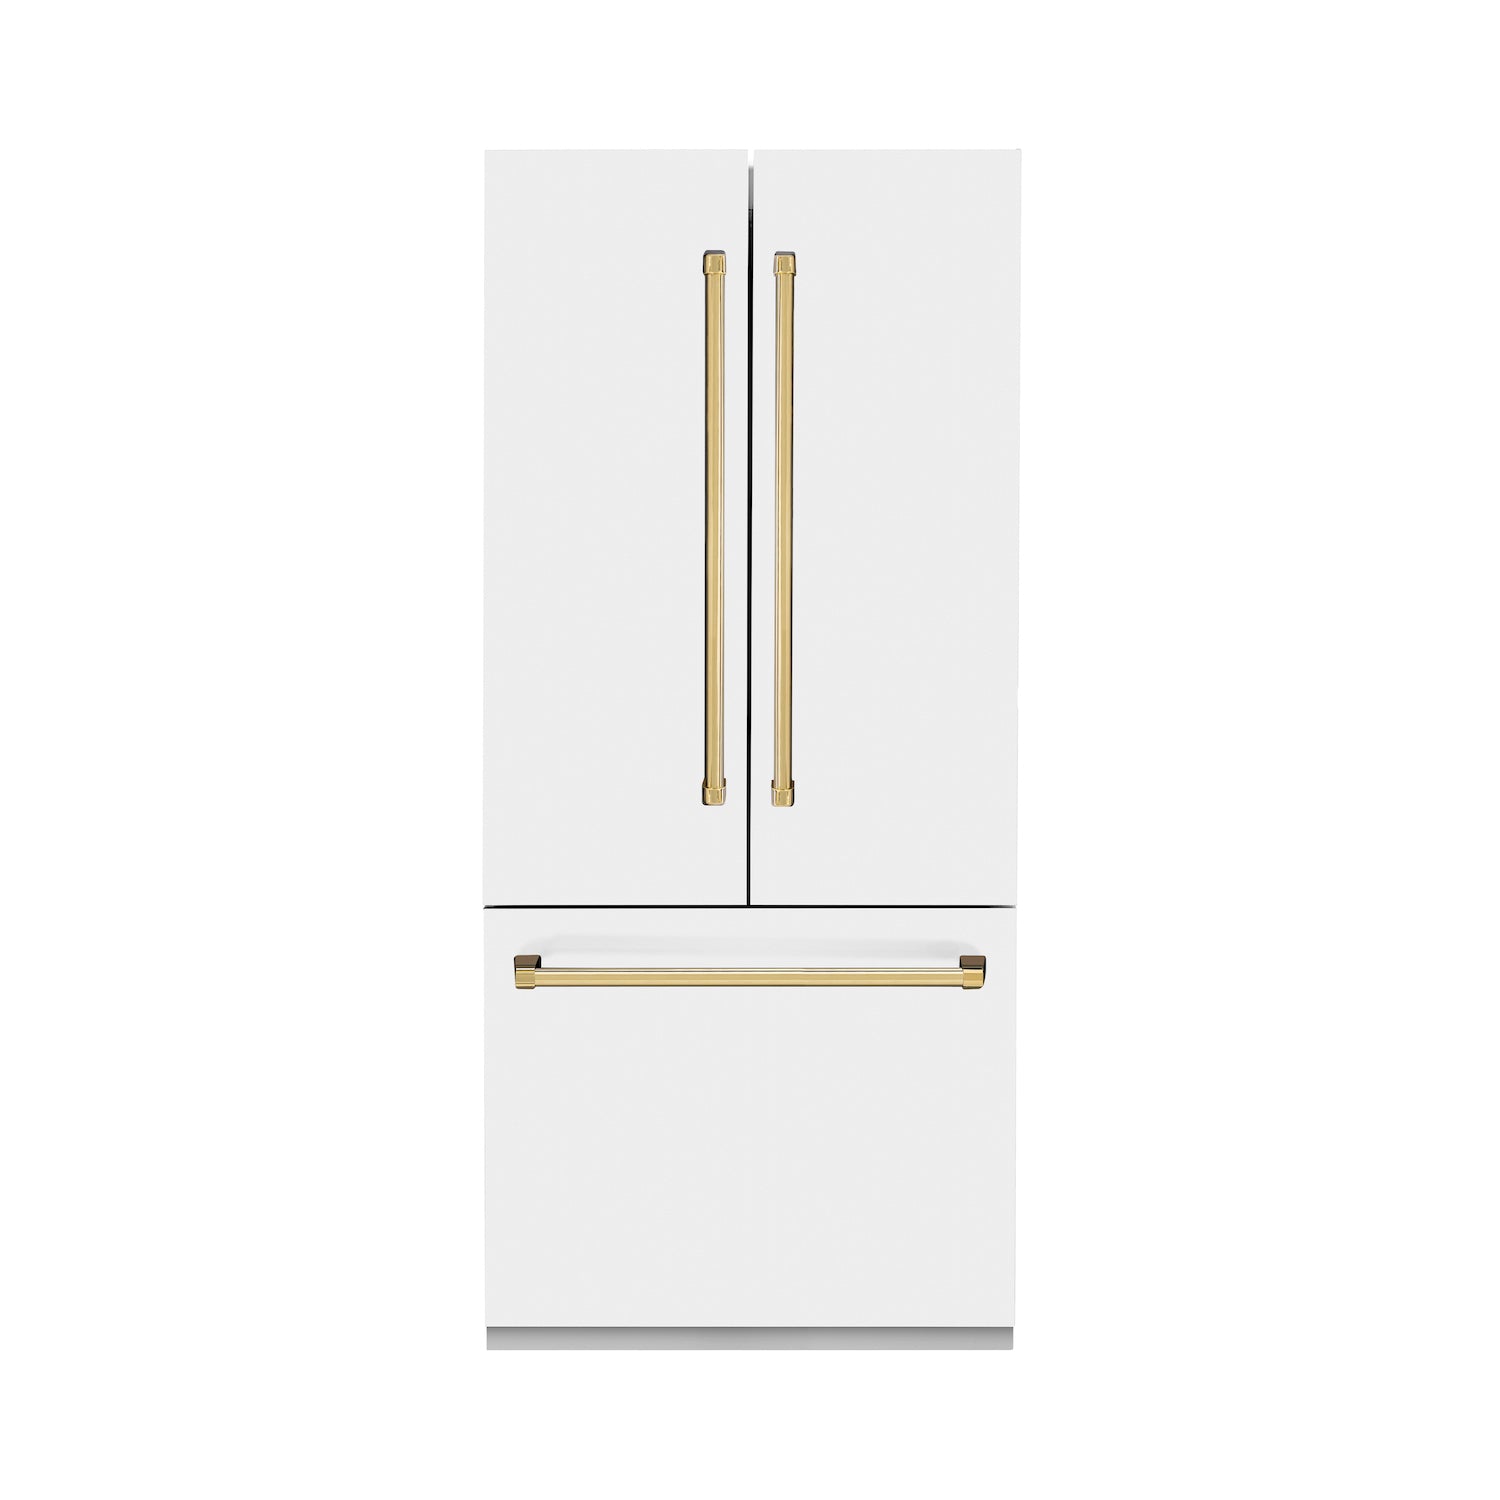 ZLINE 36" Built-In 2-Door Bottom Freezer Refrigerator with Internal Water and Ice Dispenser - Matte White with Accents